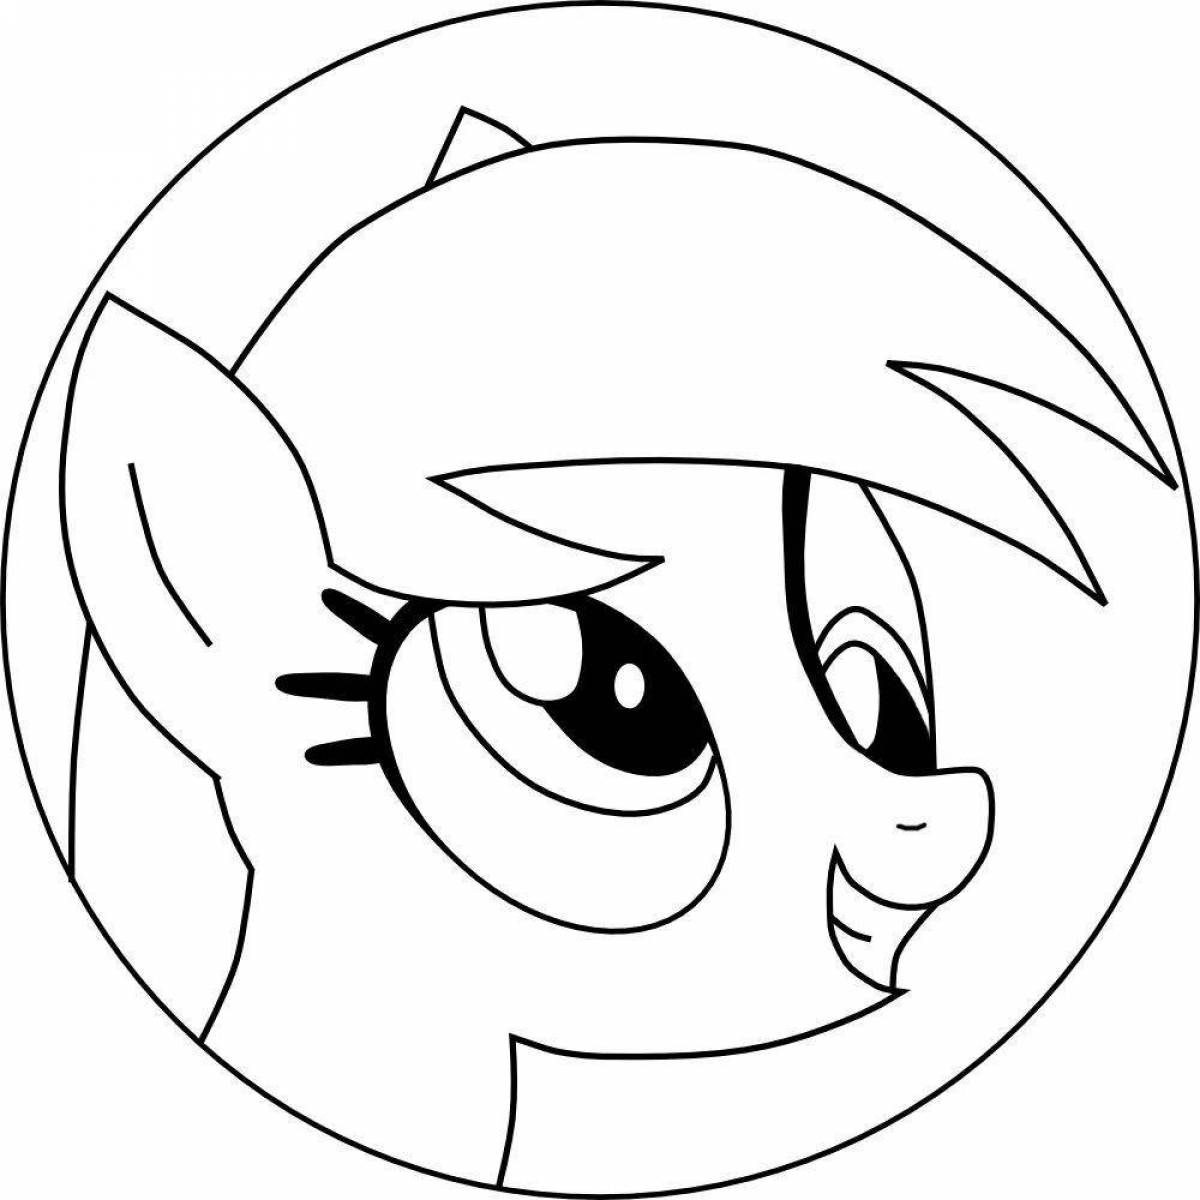 Playful mlp coloring page